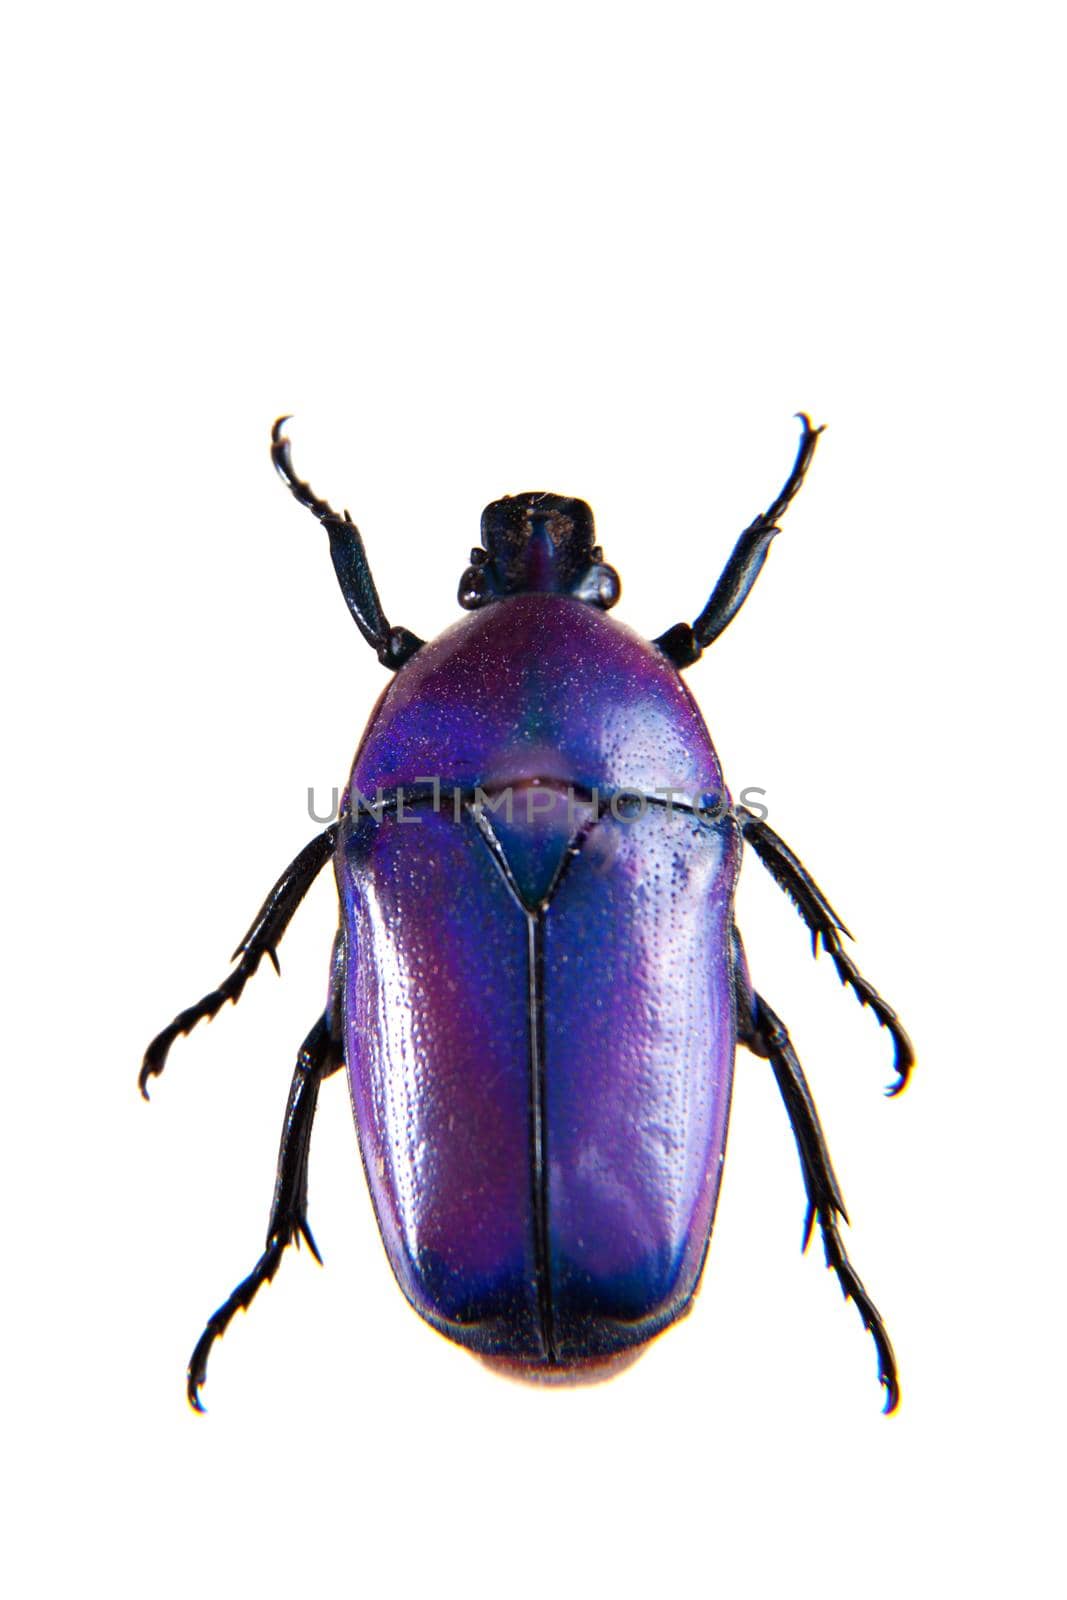 Violet beetle on the white background by RosaJay